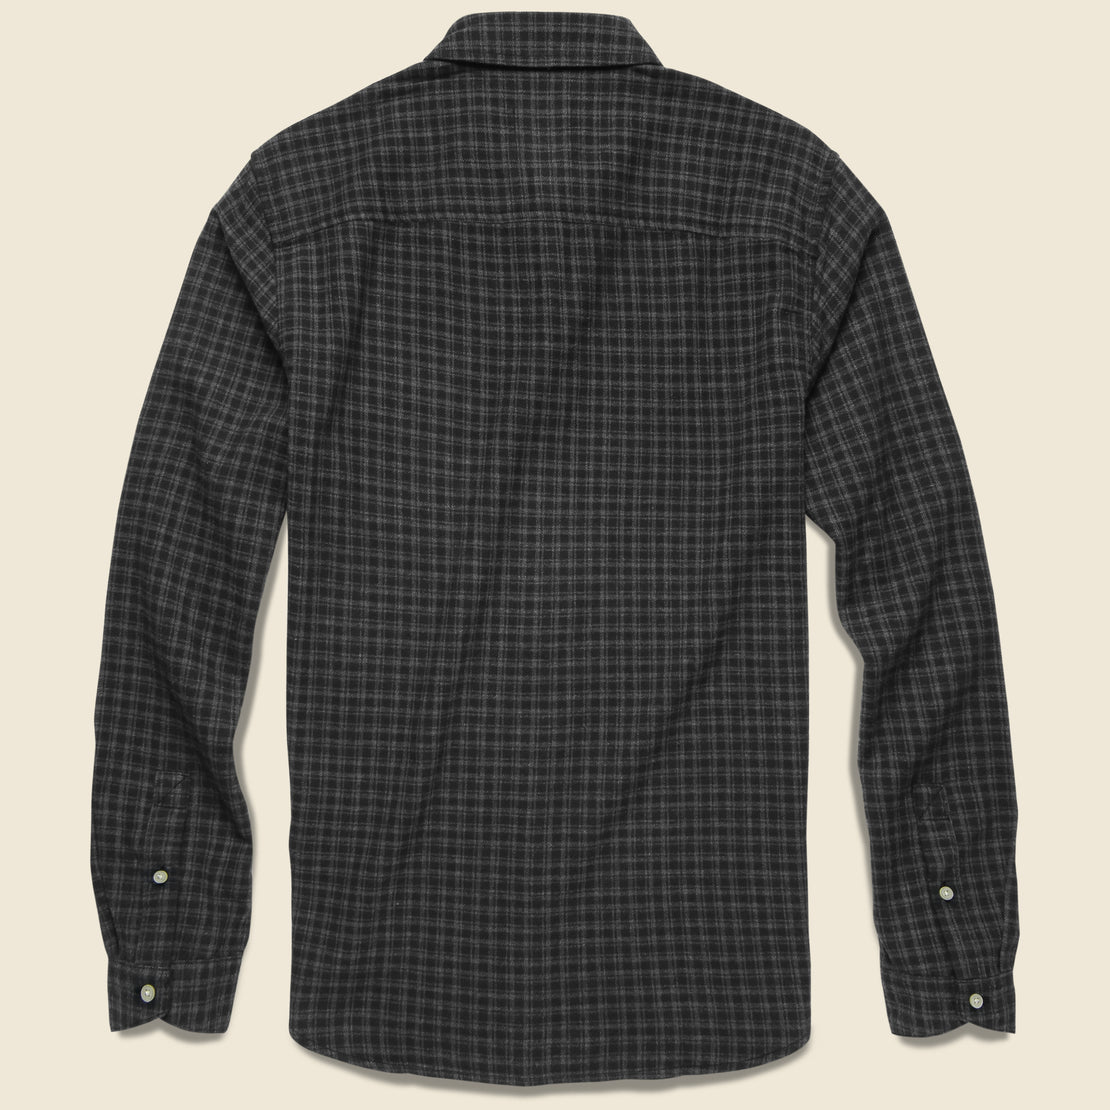 Griffin Flannel Shirt - Black - Life After Denim - STAG Provisions - Tops - L/S Woven - Plaid